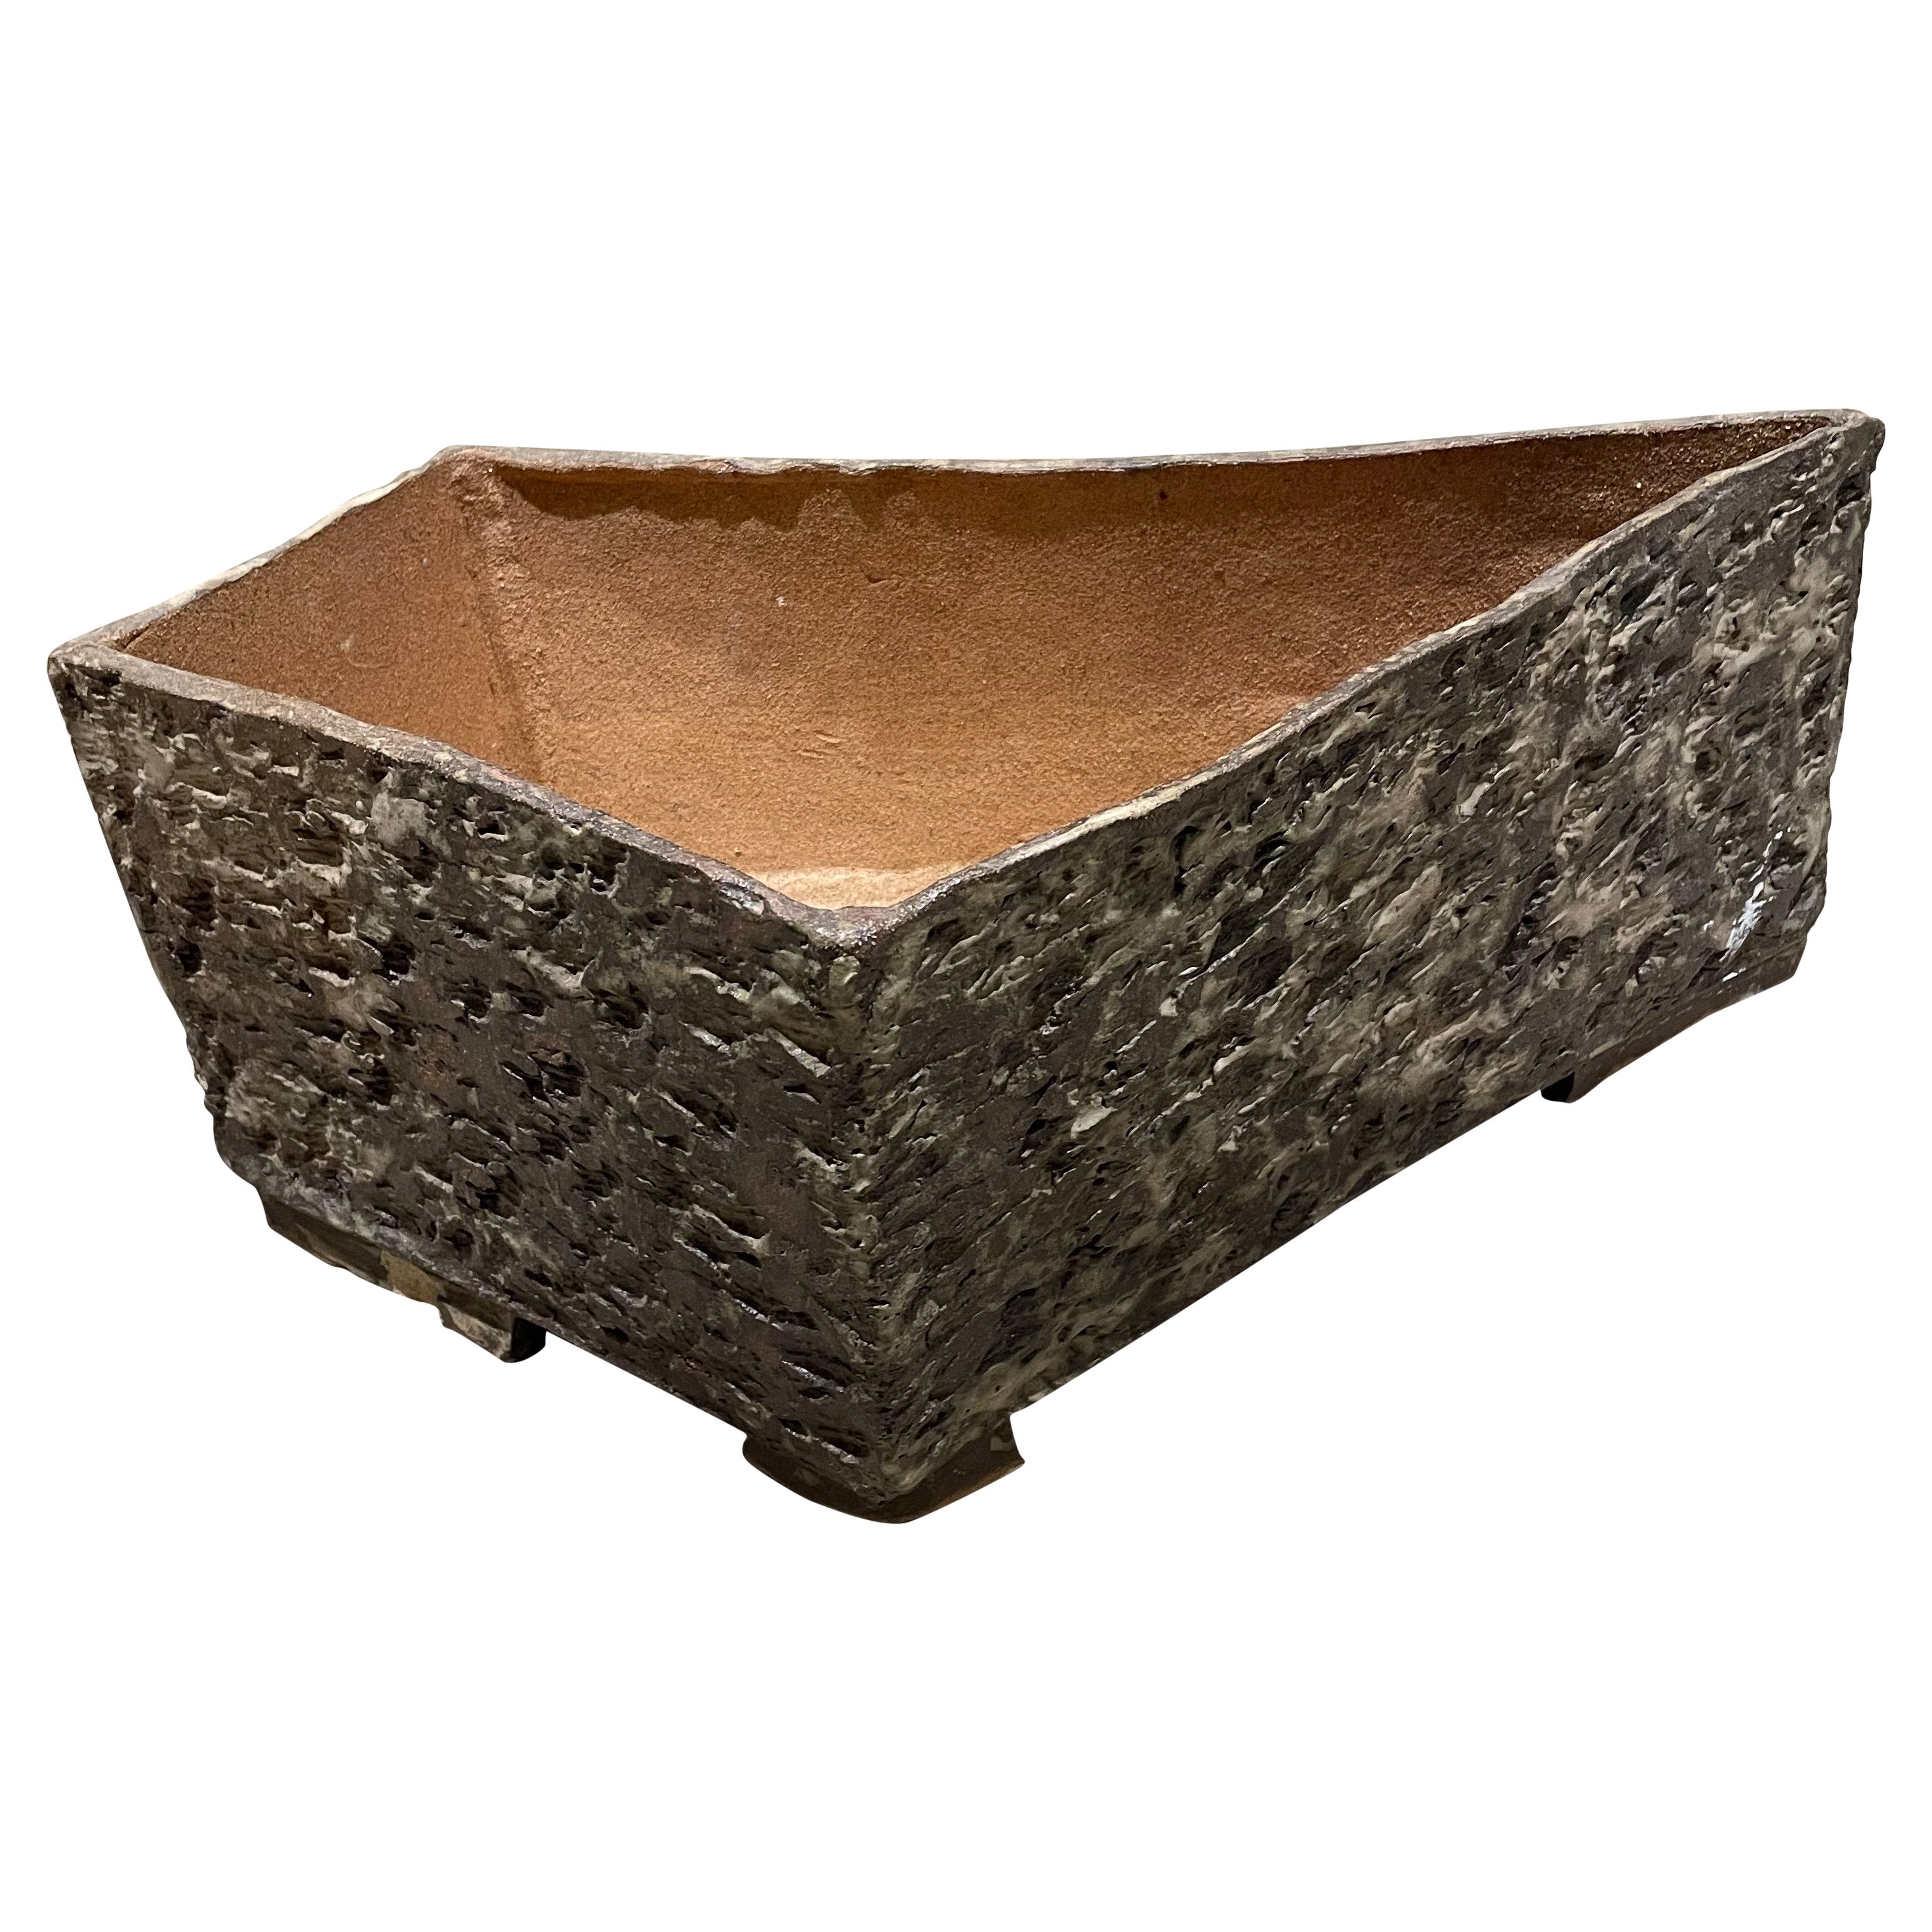 1970s Planter Box Textured Pottery Style of David Cressey For Sale